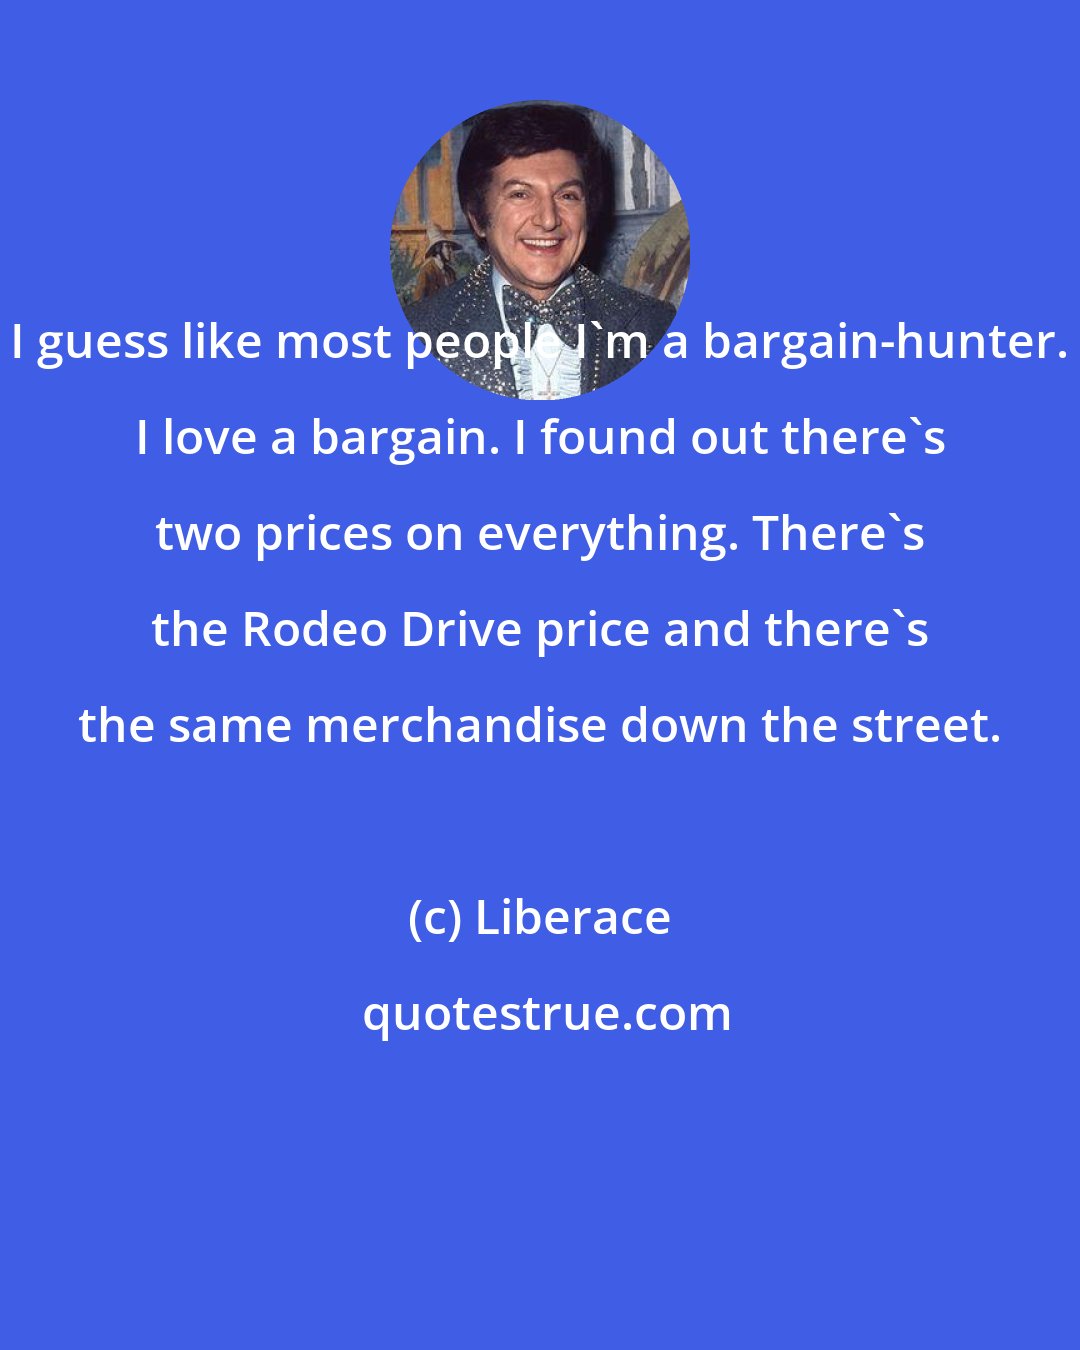 Liberace: I guess like most people I'm a bargain-hunter. I love a bargain. I found out there's two prices on everything. There's the Rodeo Drive price and there's the same merchandise down the street.